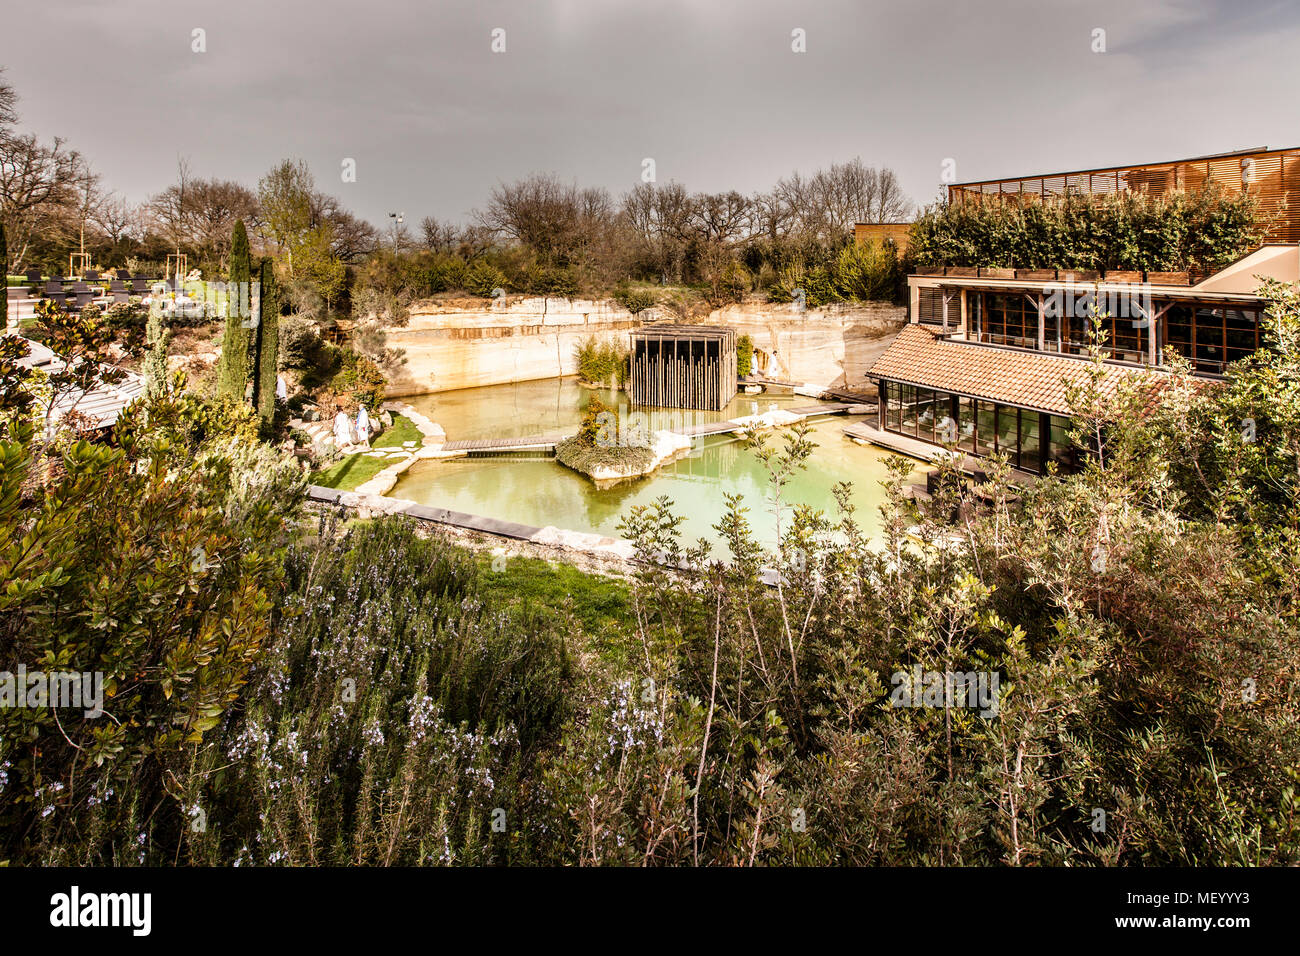 Hotel Adler Thermae, Bagno Vignoni, Tuscany with thermal pool, Tuscany, Val d'orcia Italy, UNESCO World Heritage. The hotel building in the style of a Tuscan villa is built in a former quarry. Thus, the hotel Adler Thermae blends into the UNESCO protected landscape Stock Photo